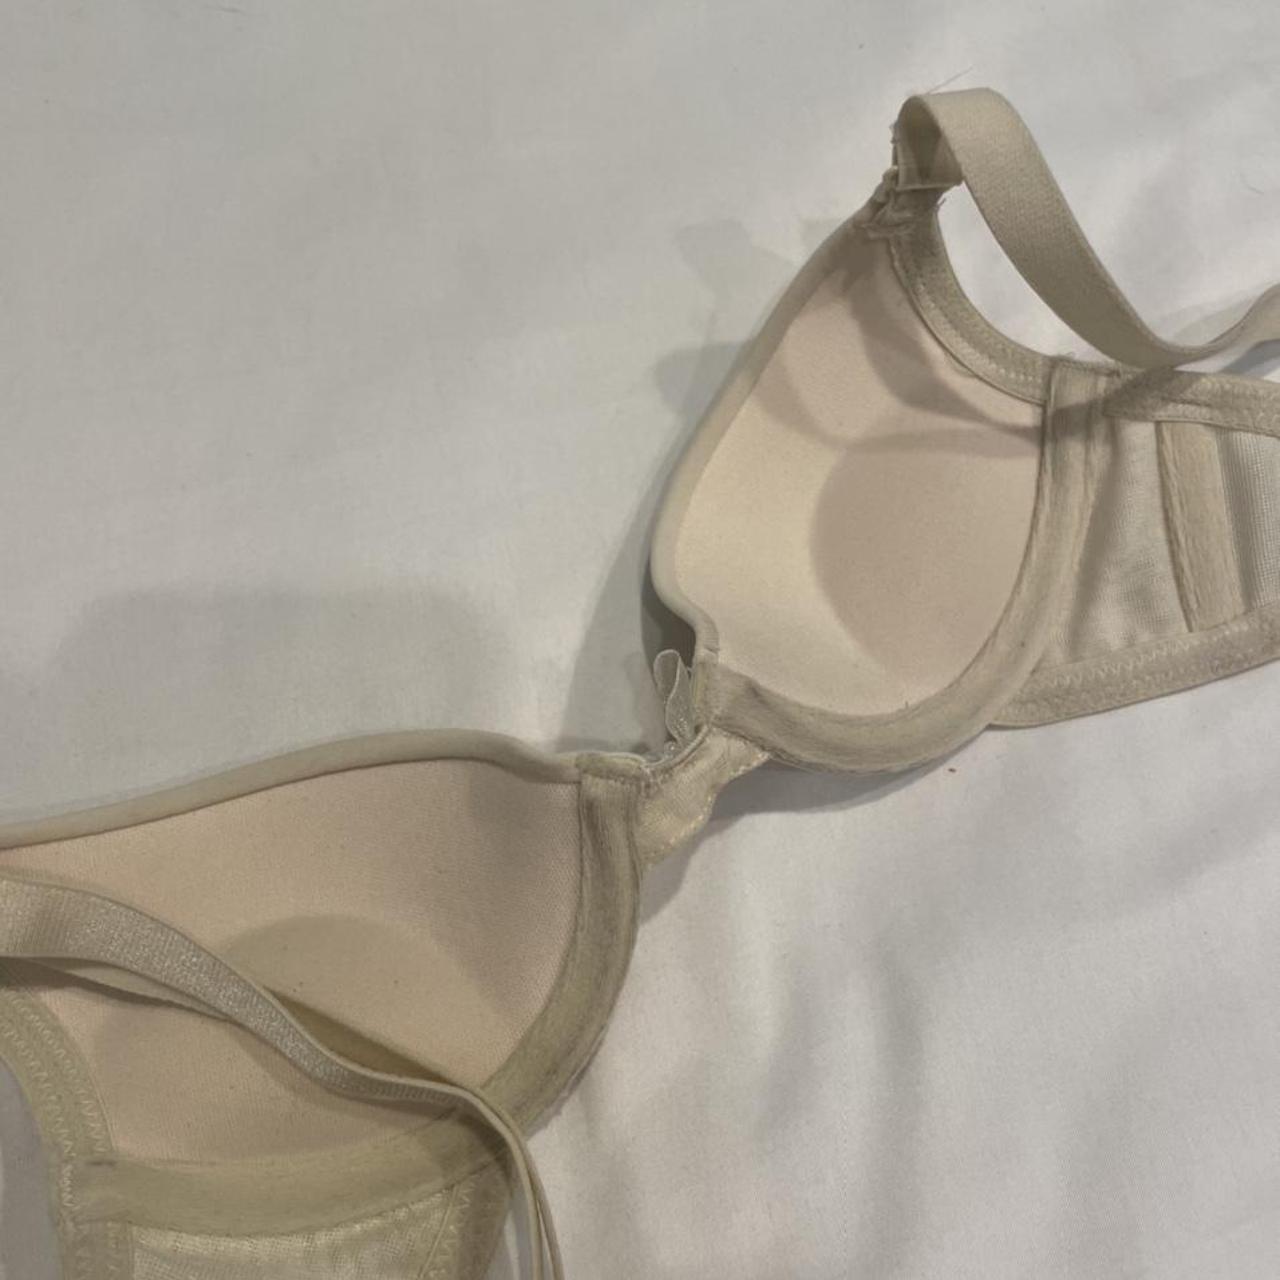 Product Image 2 - Push up Bra for petite